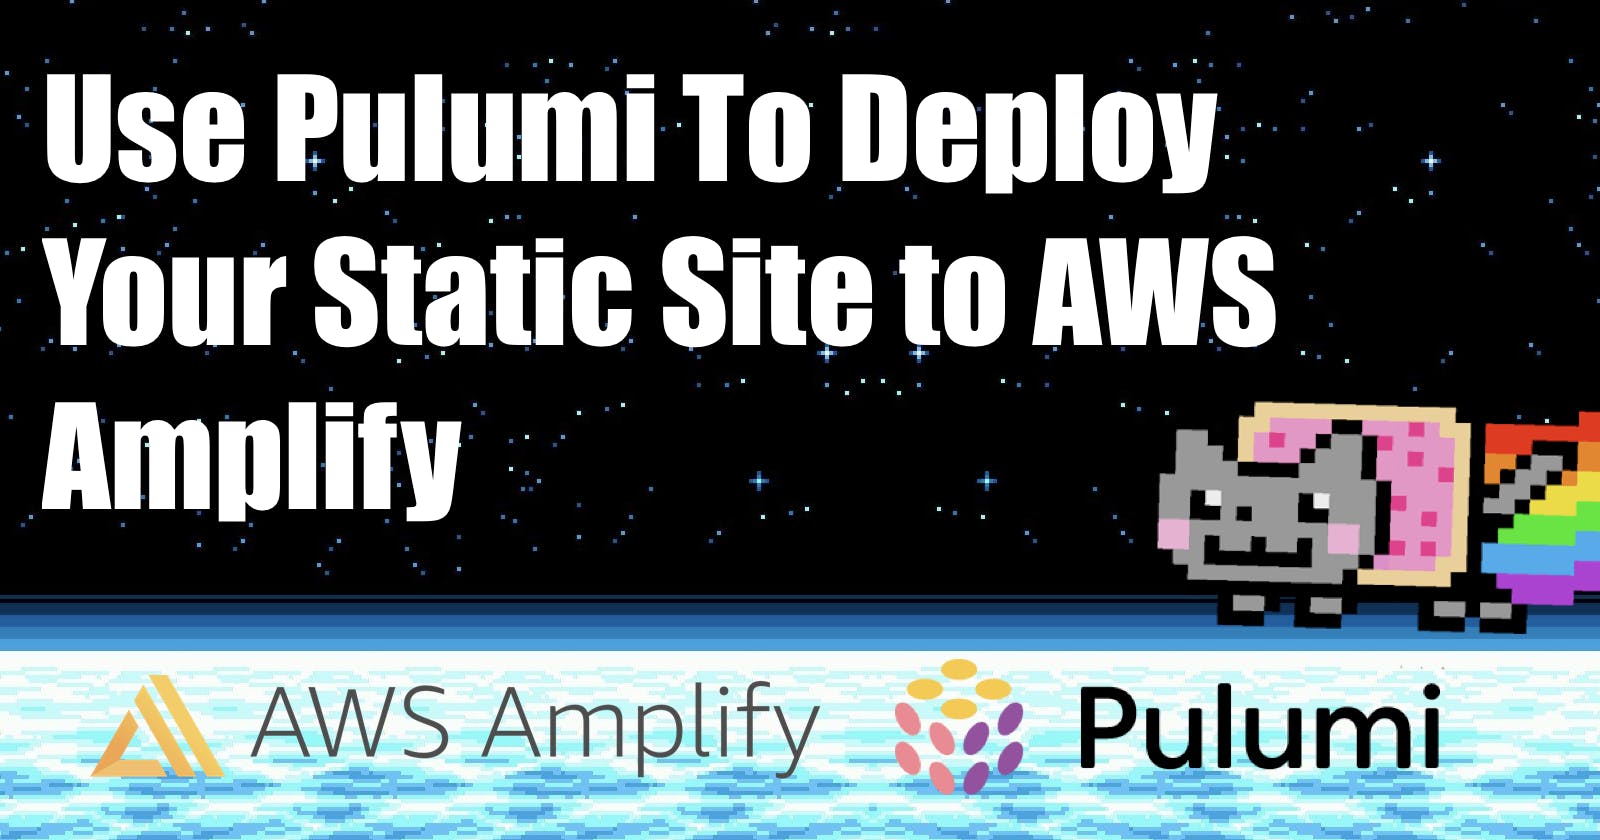 Use Pulumi To Deploy Your Static Site to AWS Amplify